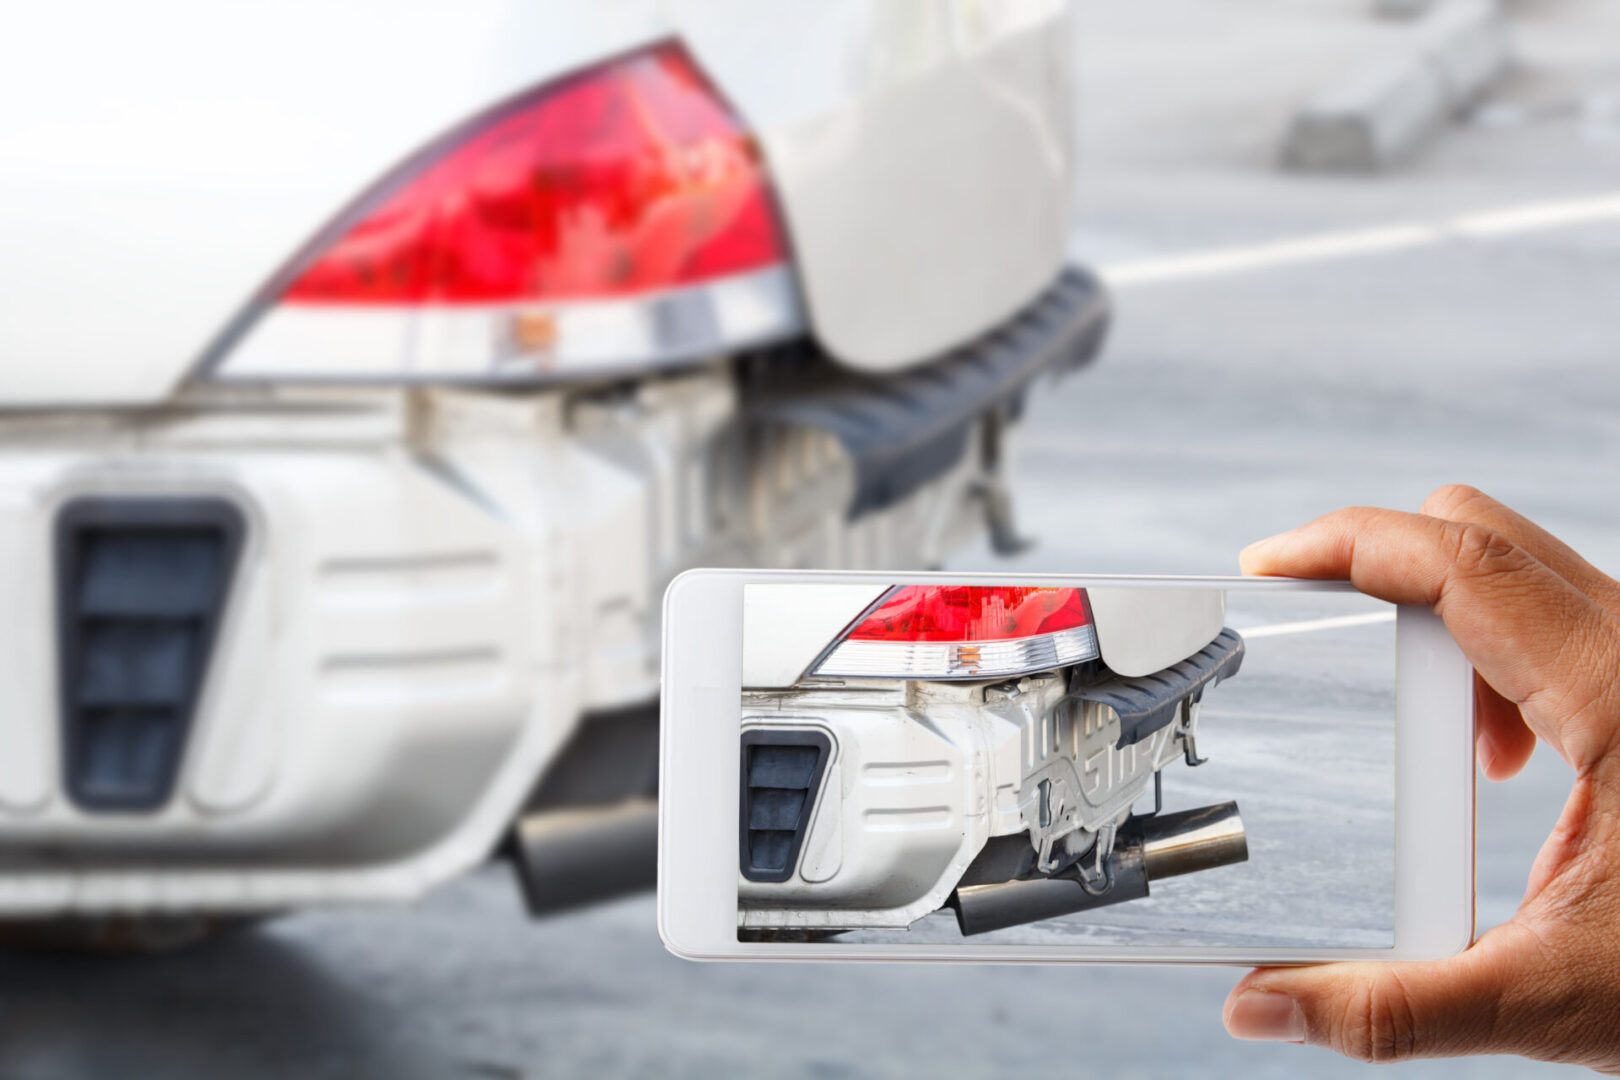 A Person Taking a Photograph of a Damaged White Car